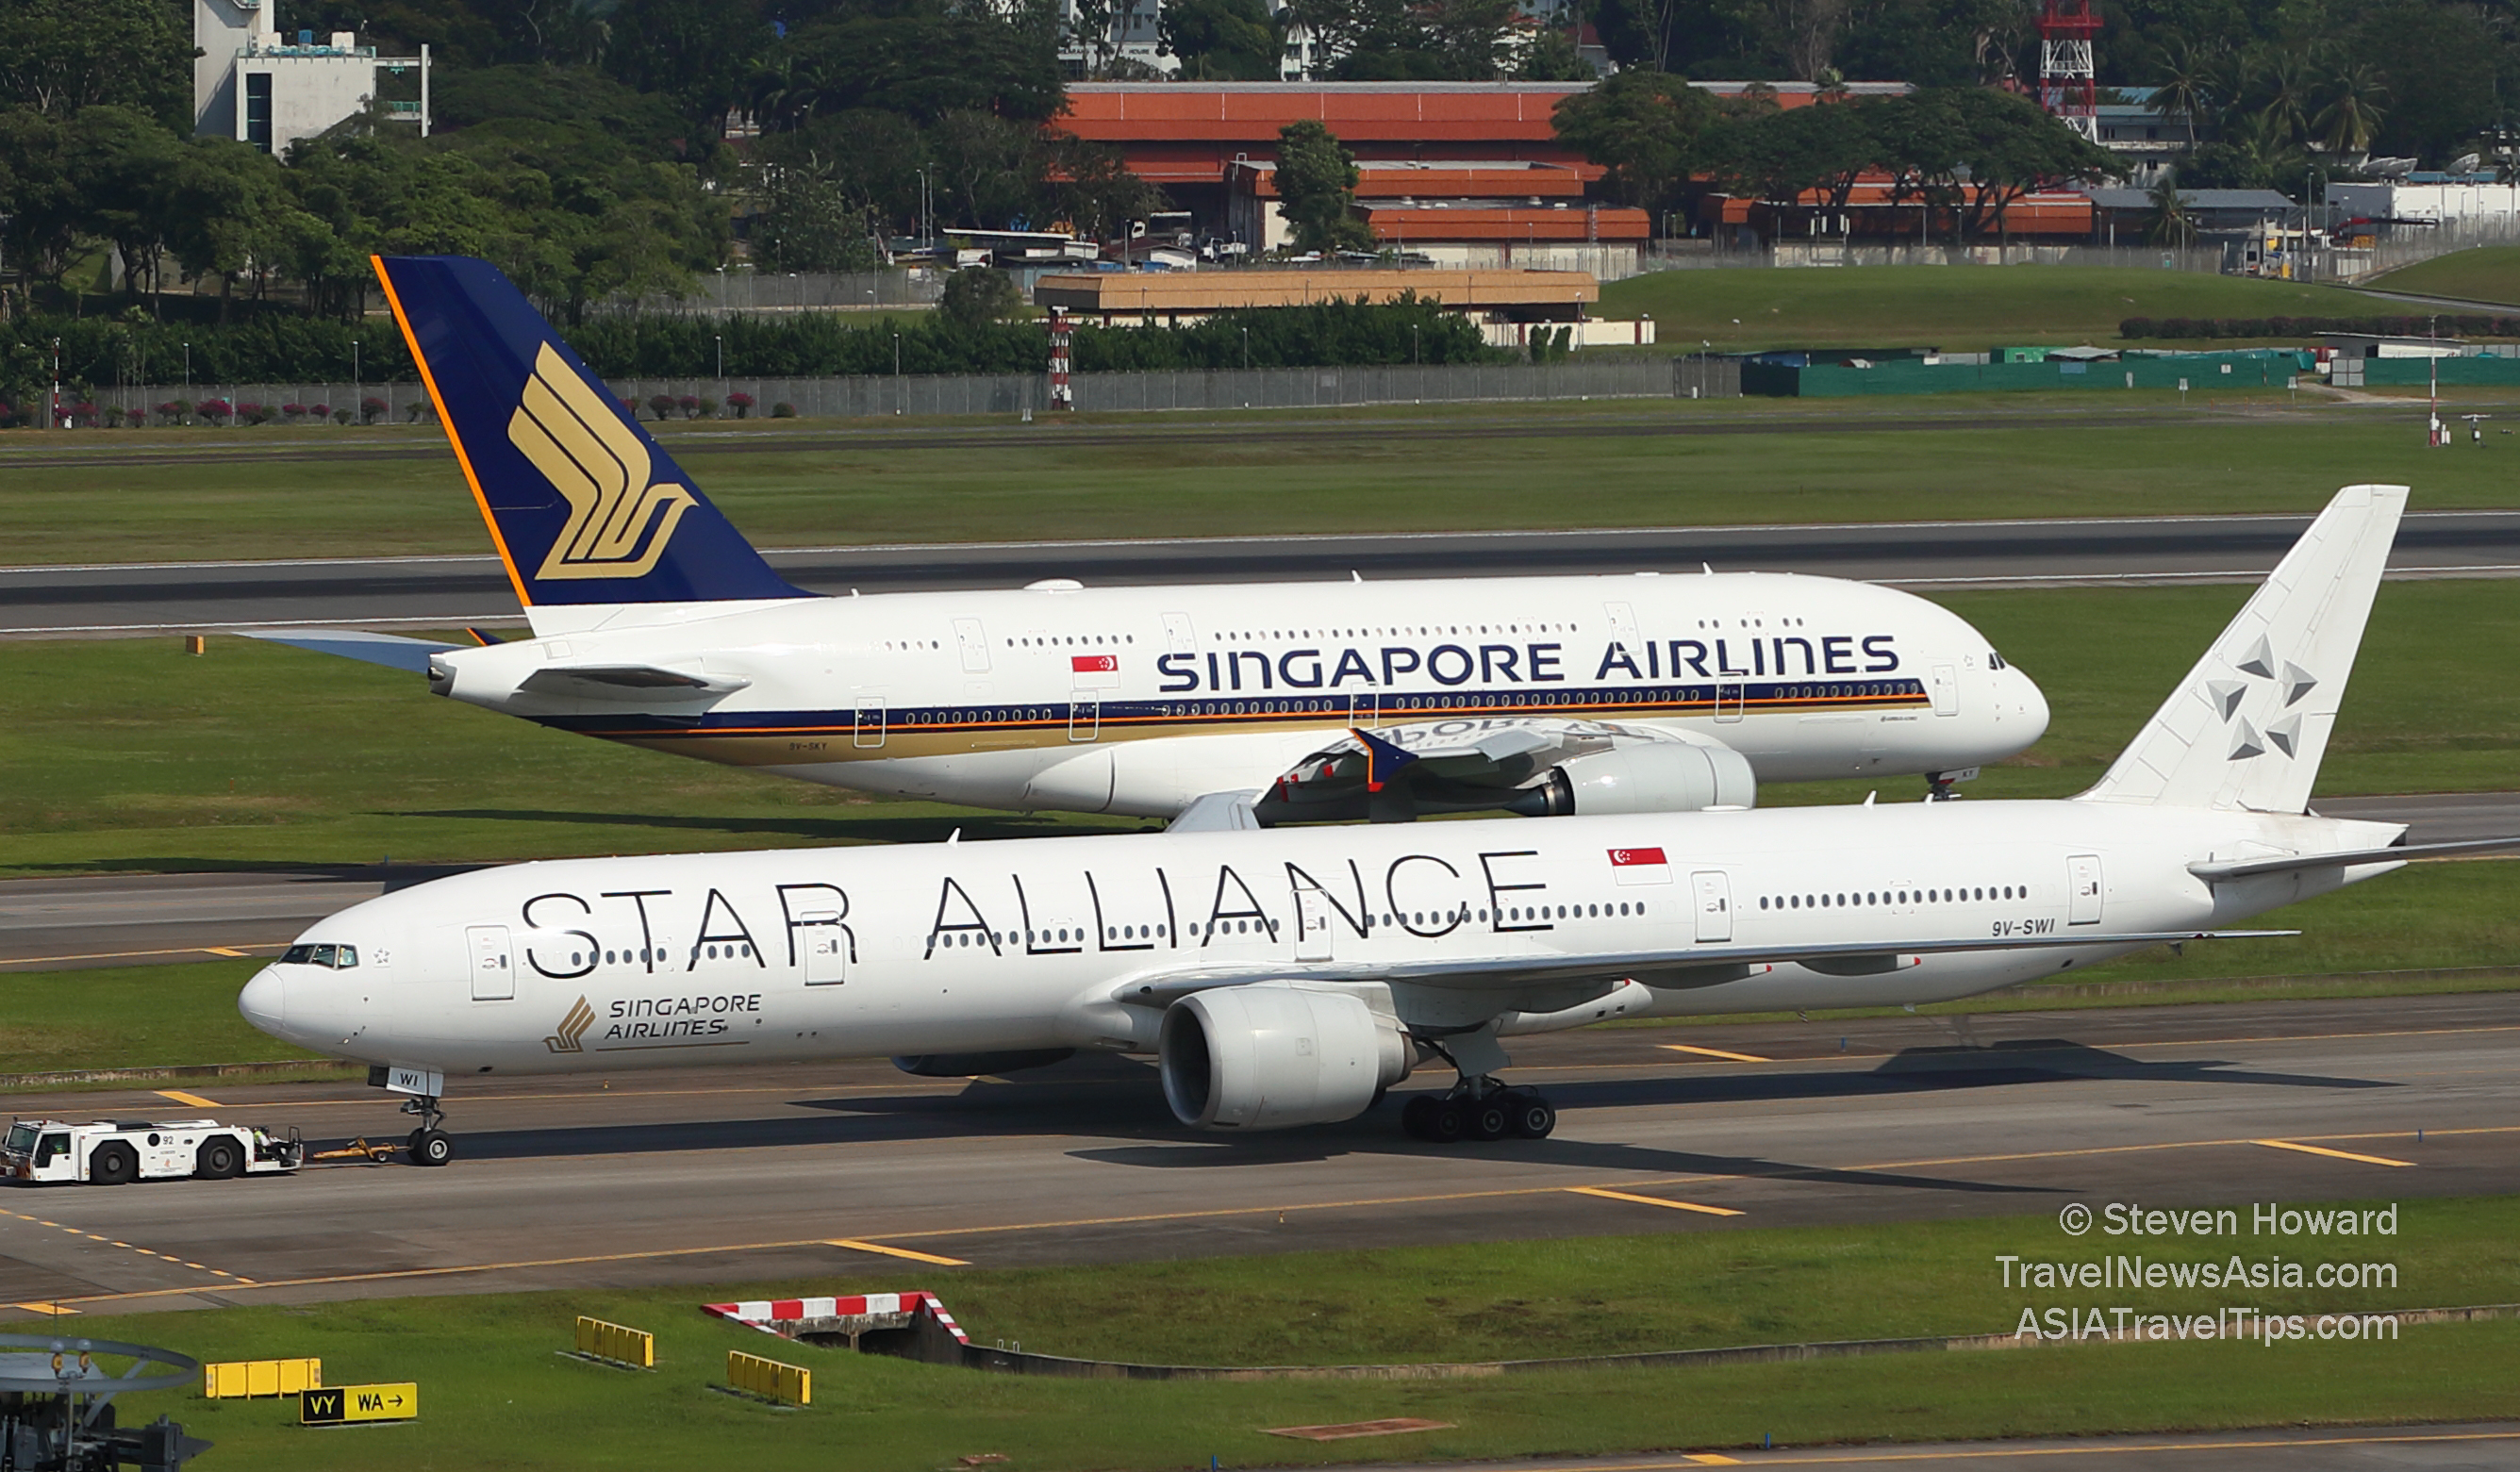 Singapore Airlines aircraft at Changi Airport in Singapore. Picture by Steven Howard of TravelNewsAsia.com Click to enlarge.